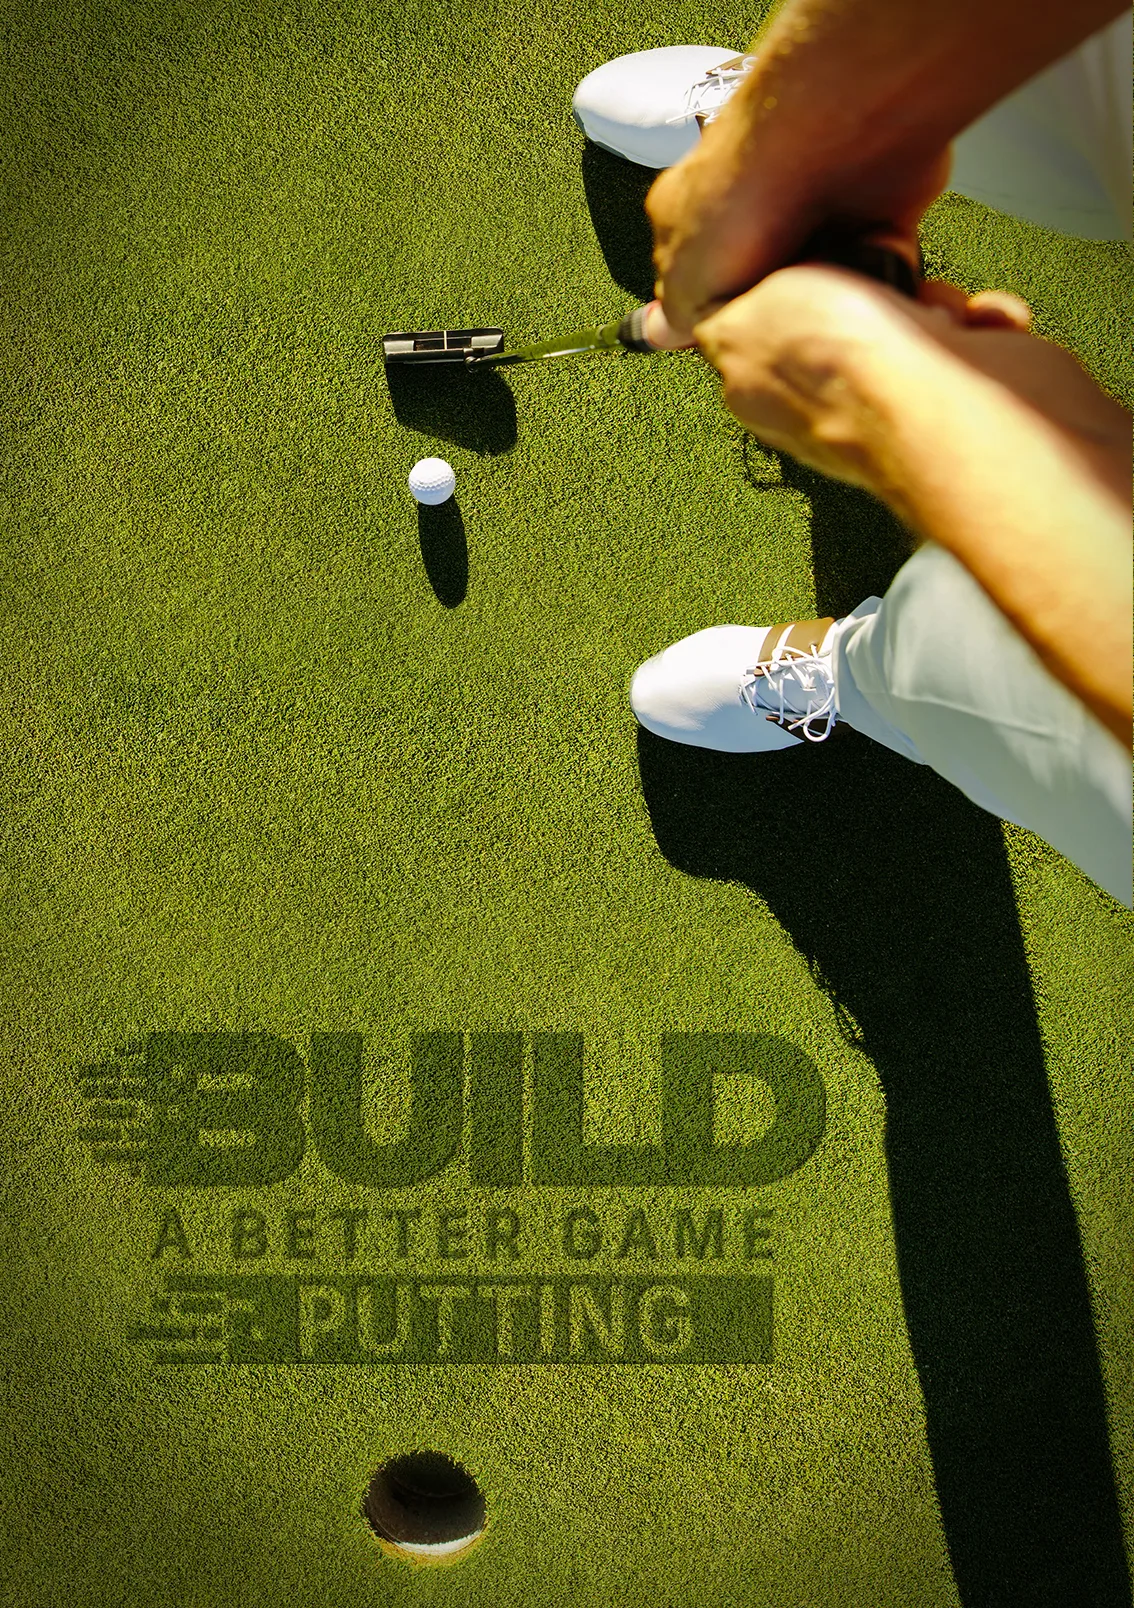 Build a Better Game Putting